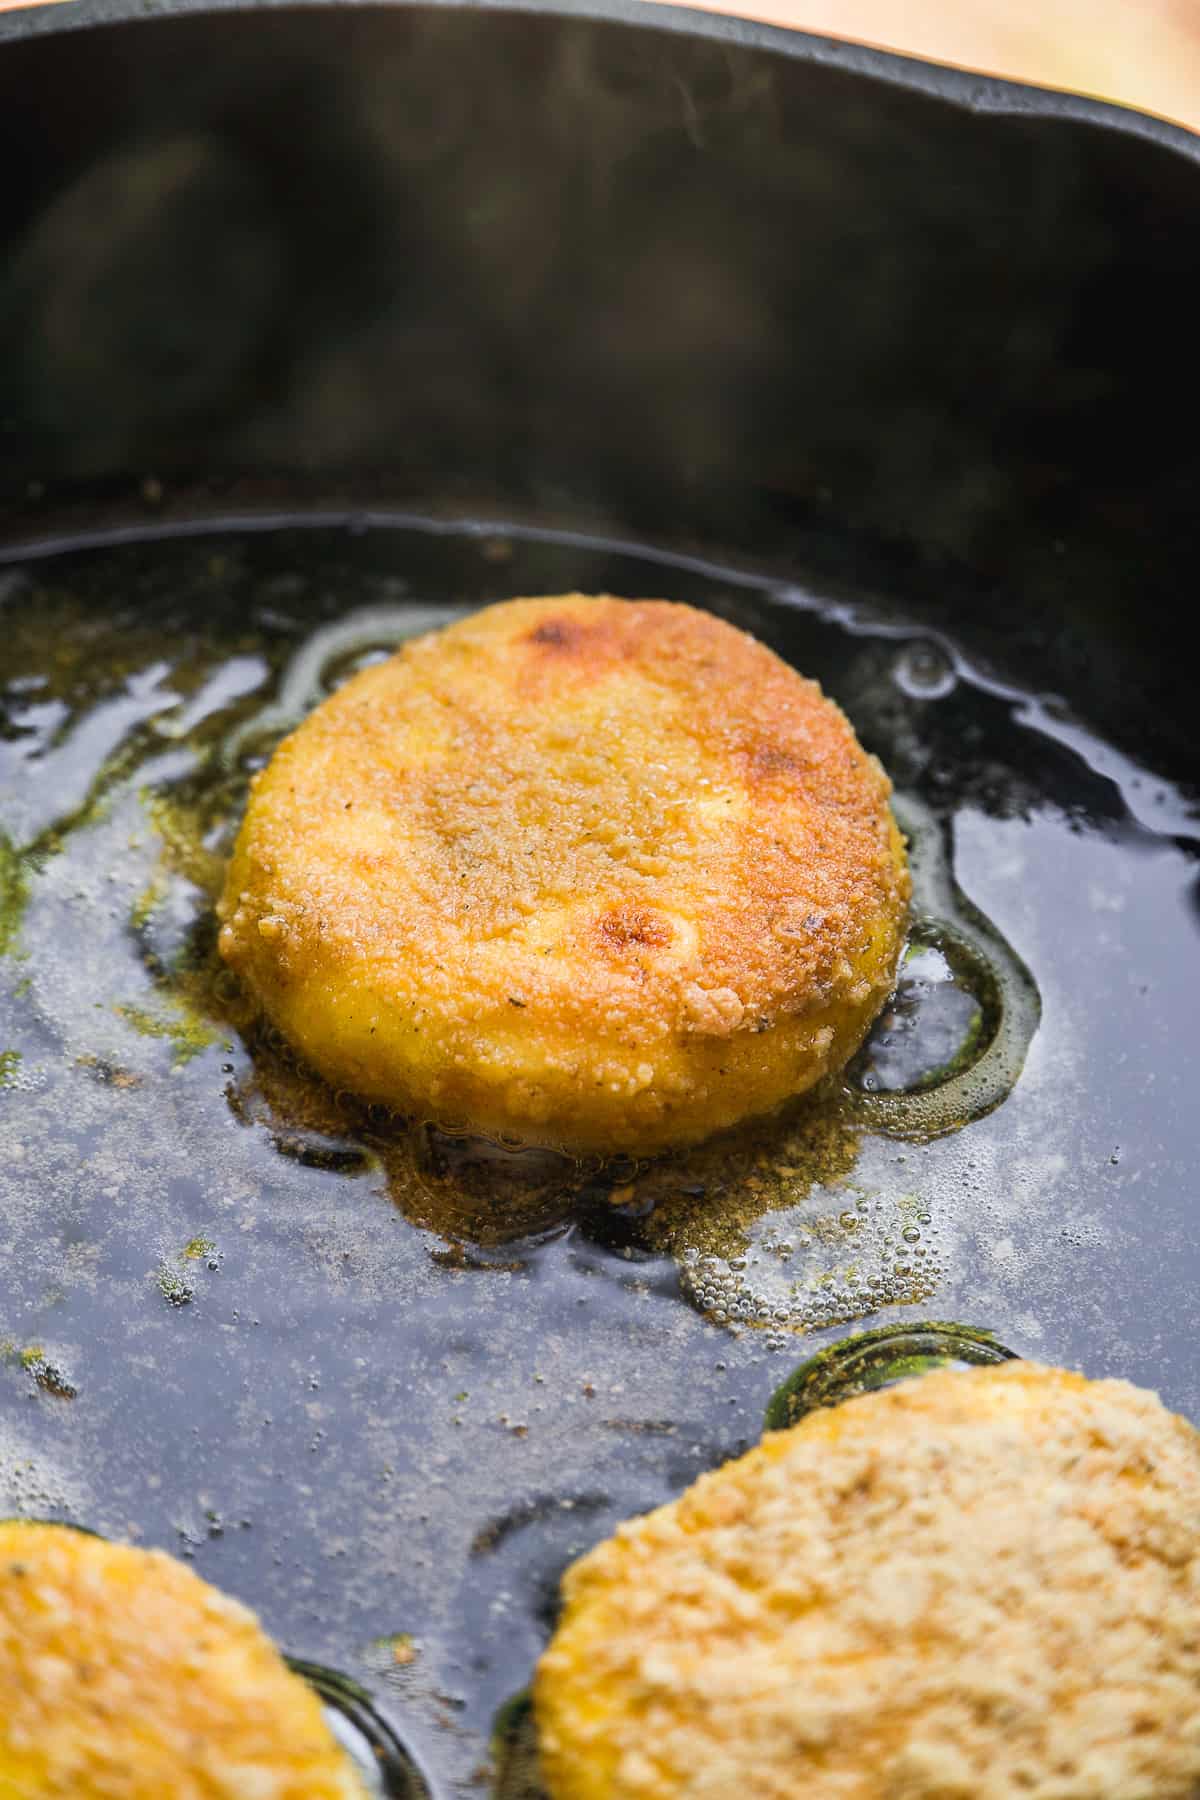 Goat cheese patty pan frying in a cast iron skillet.